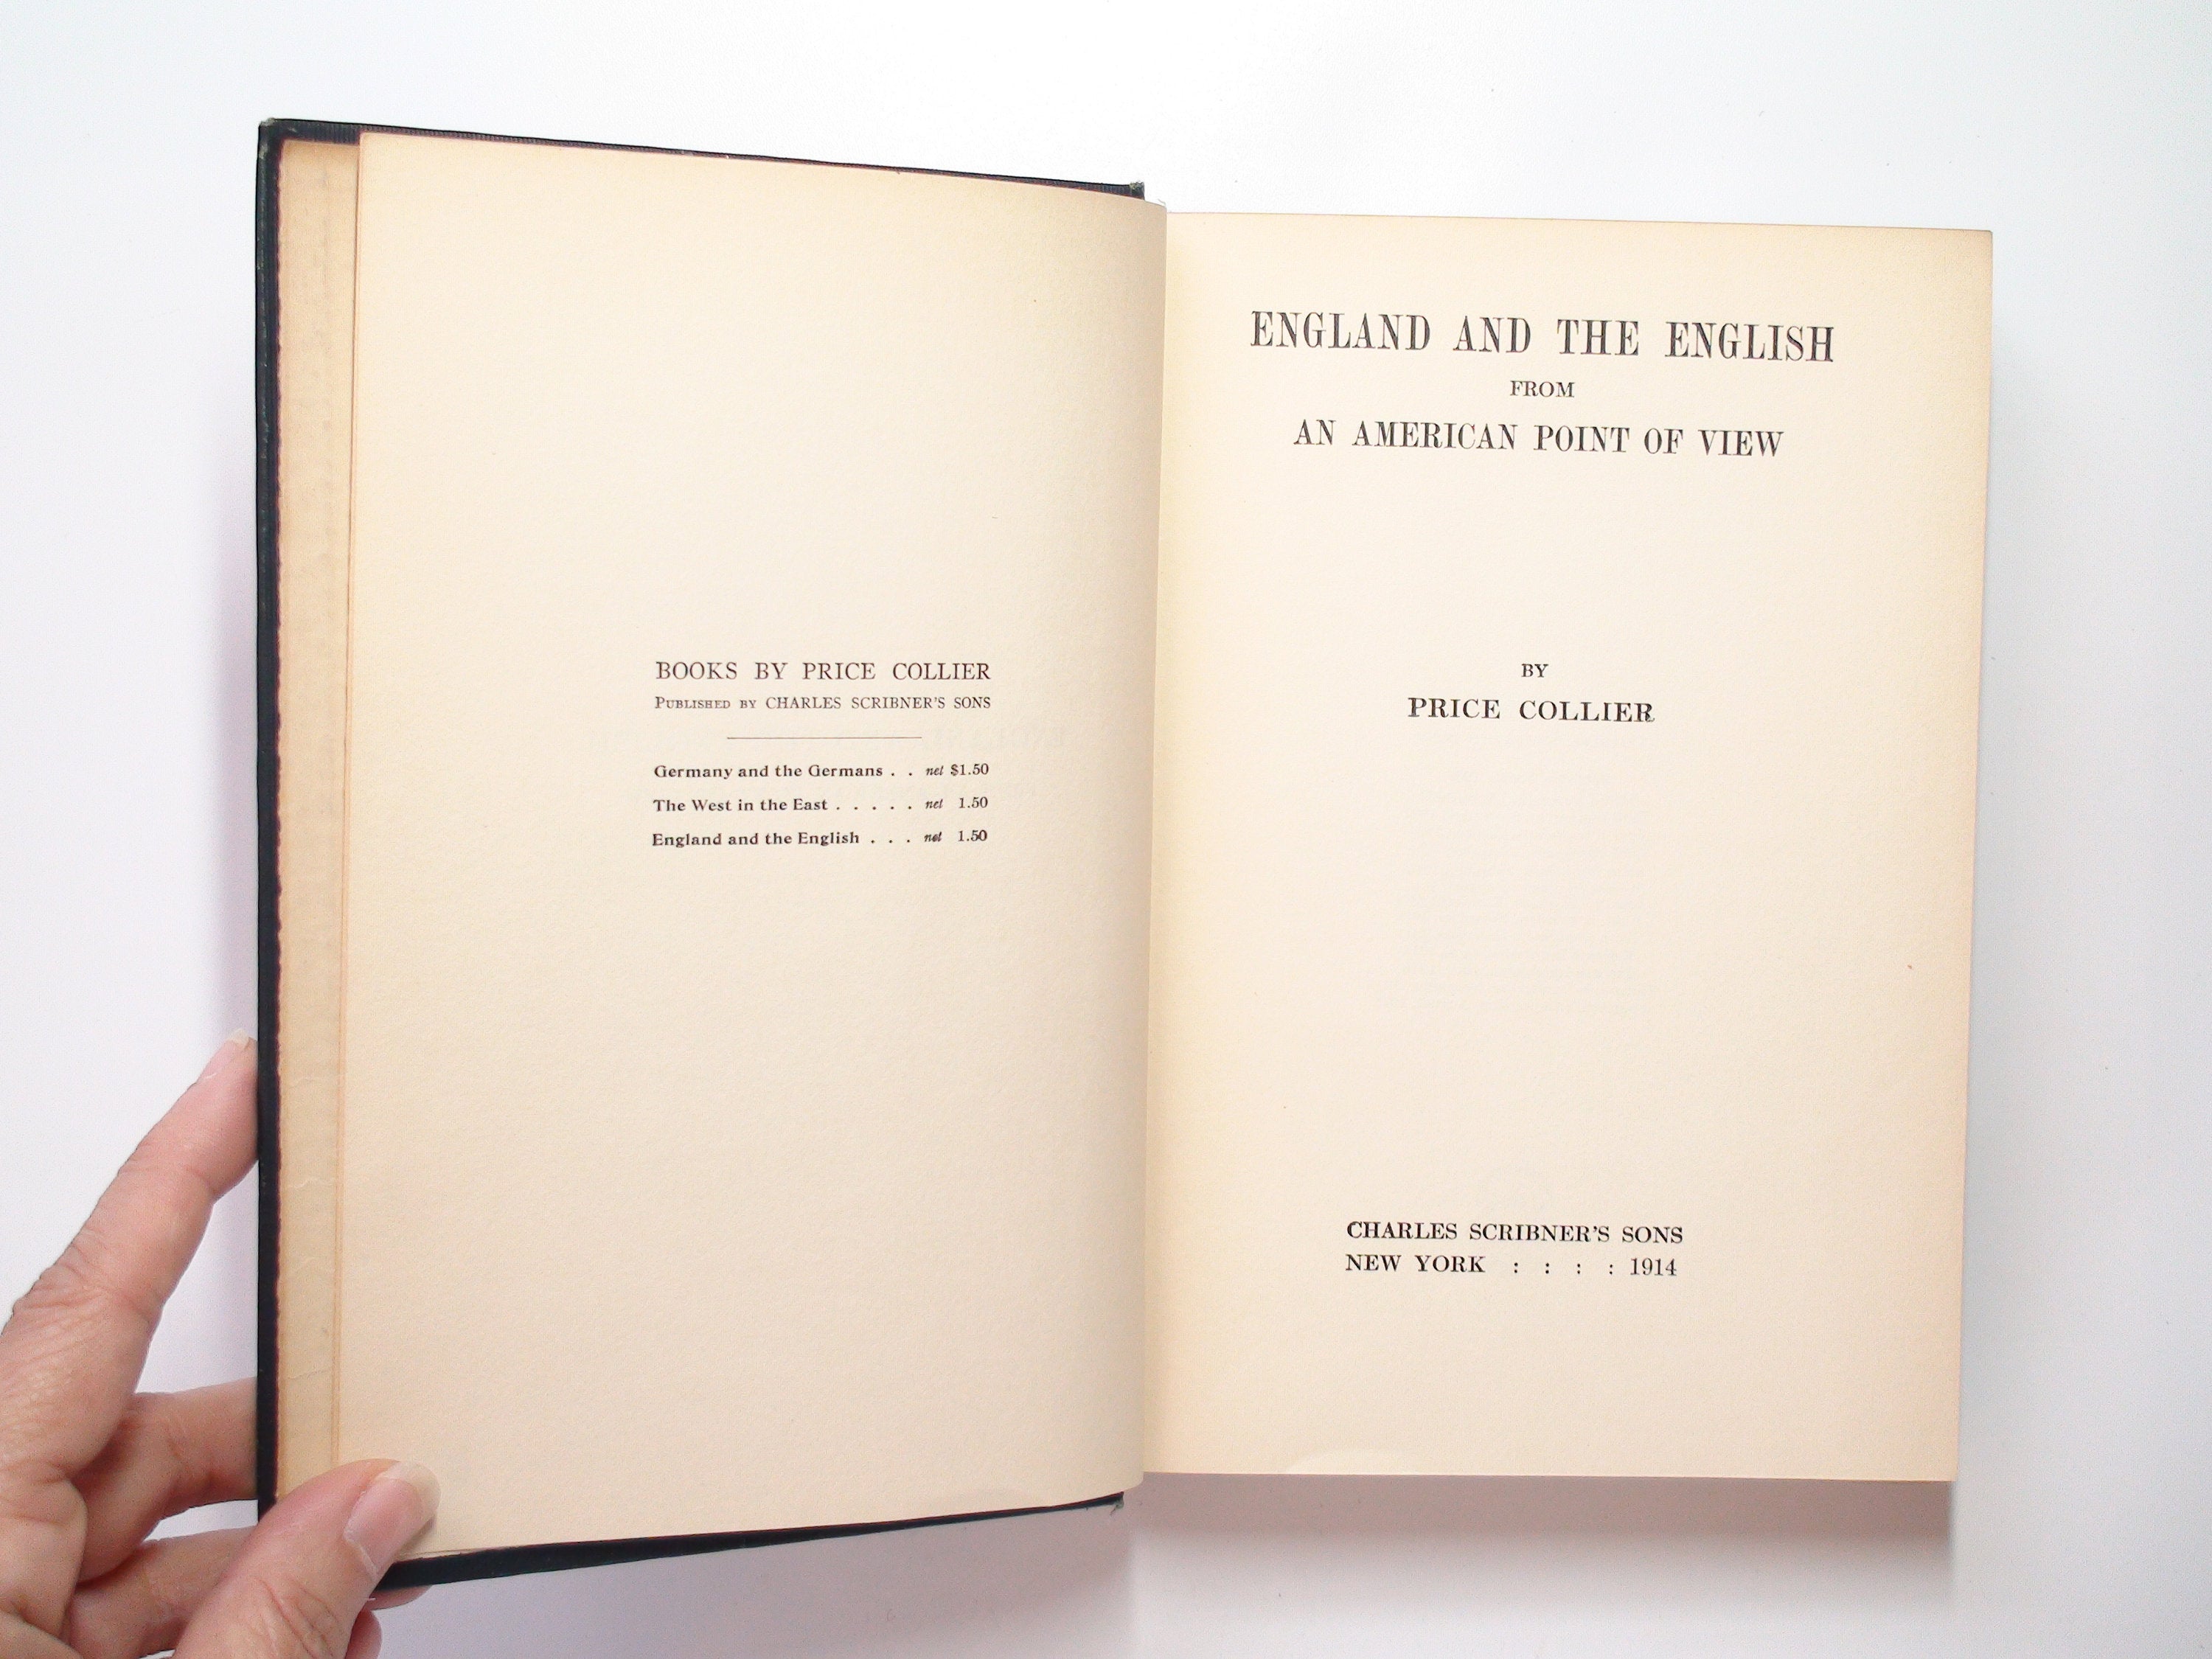 England and the English From an American Point of View by Price Collier, 1914